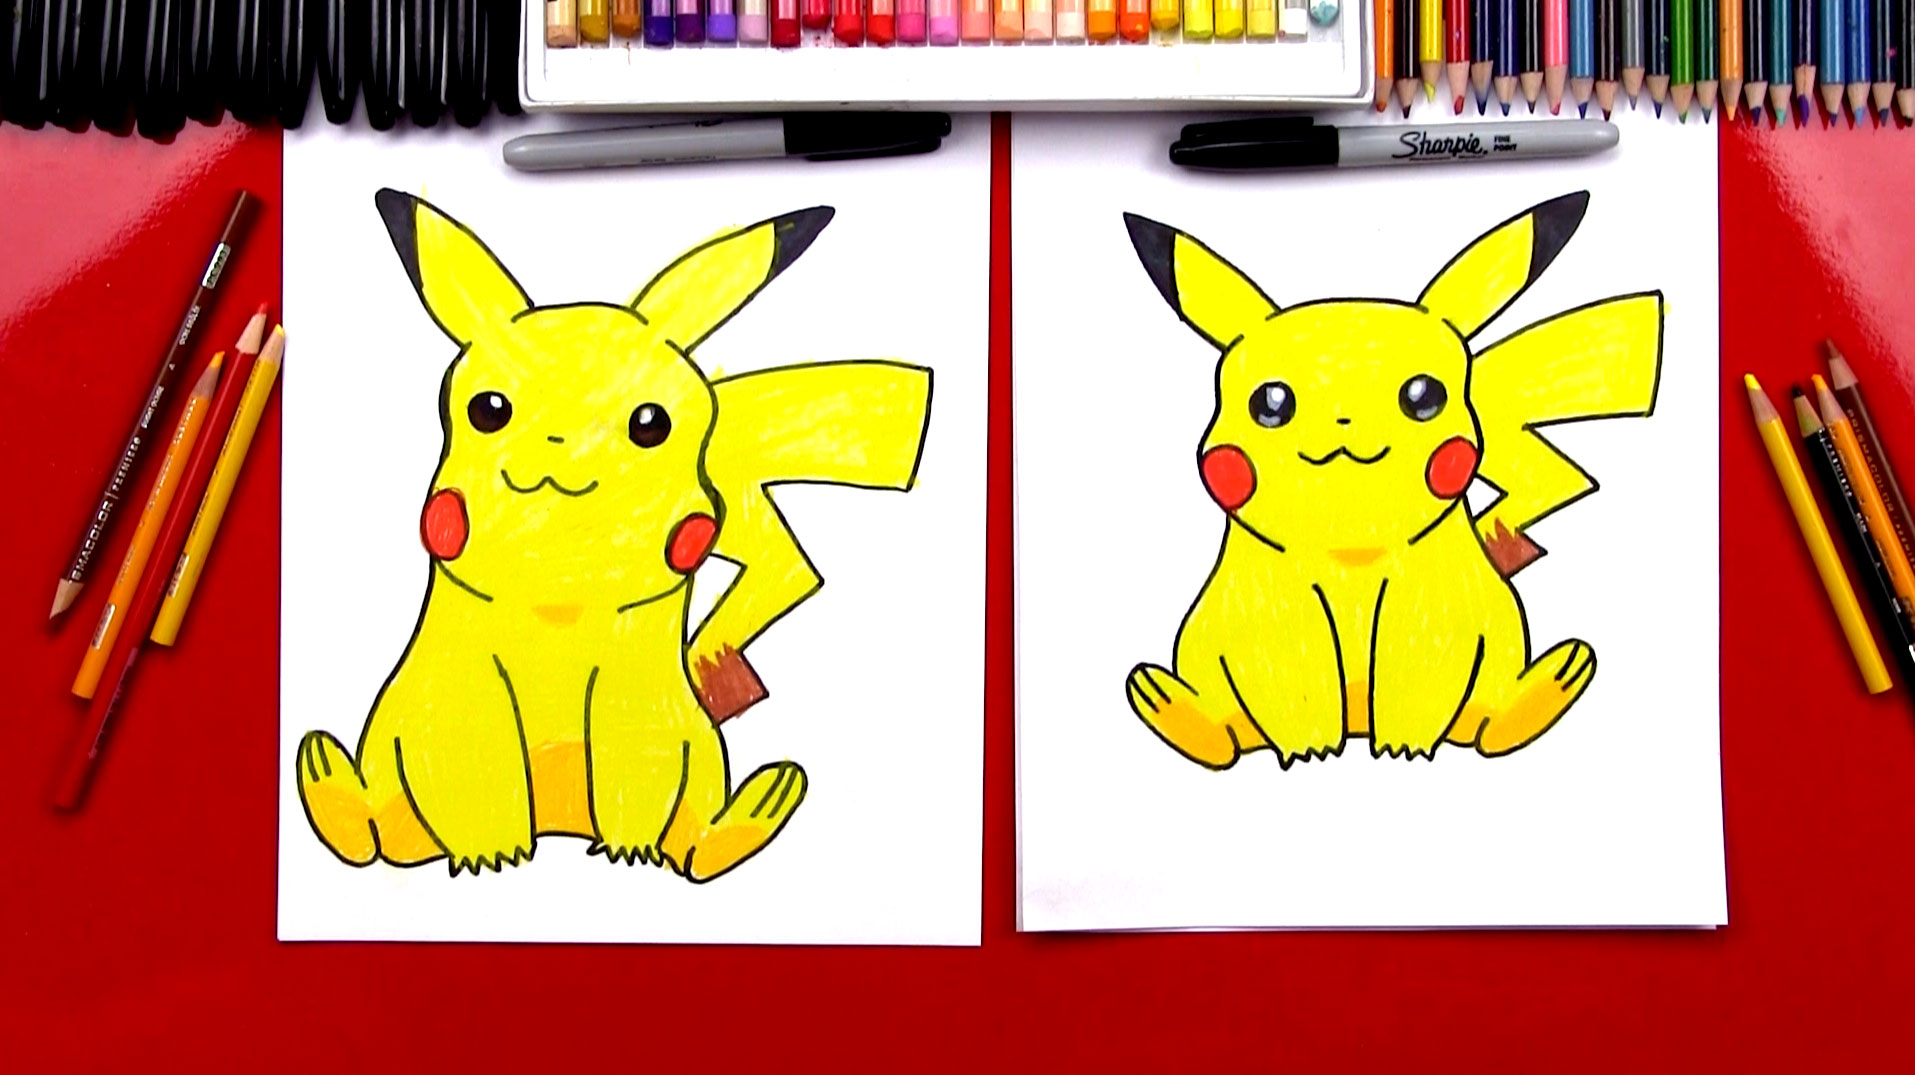 Detective Pikachu fan art, drawn from memory, by the Polygon staff - Polygon